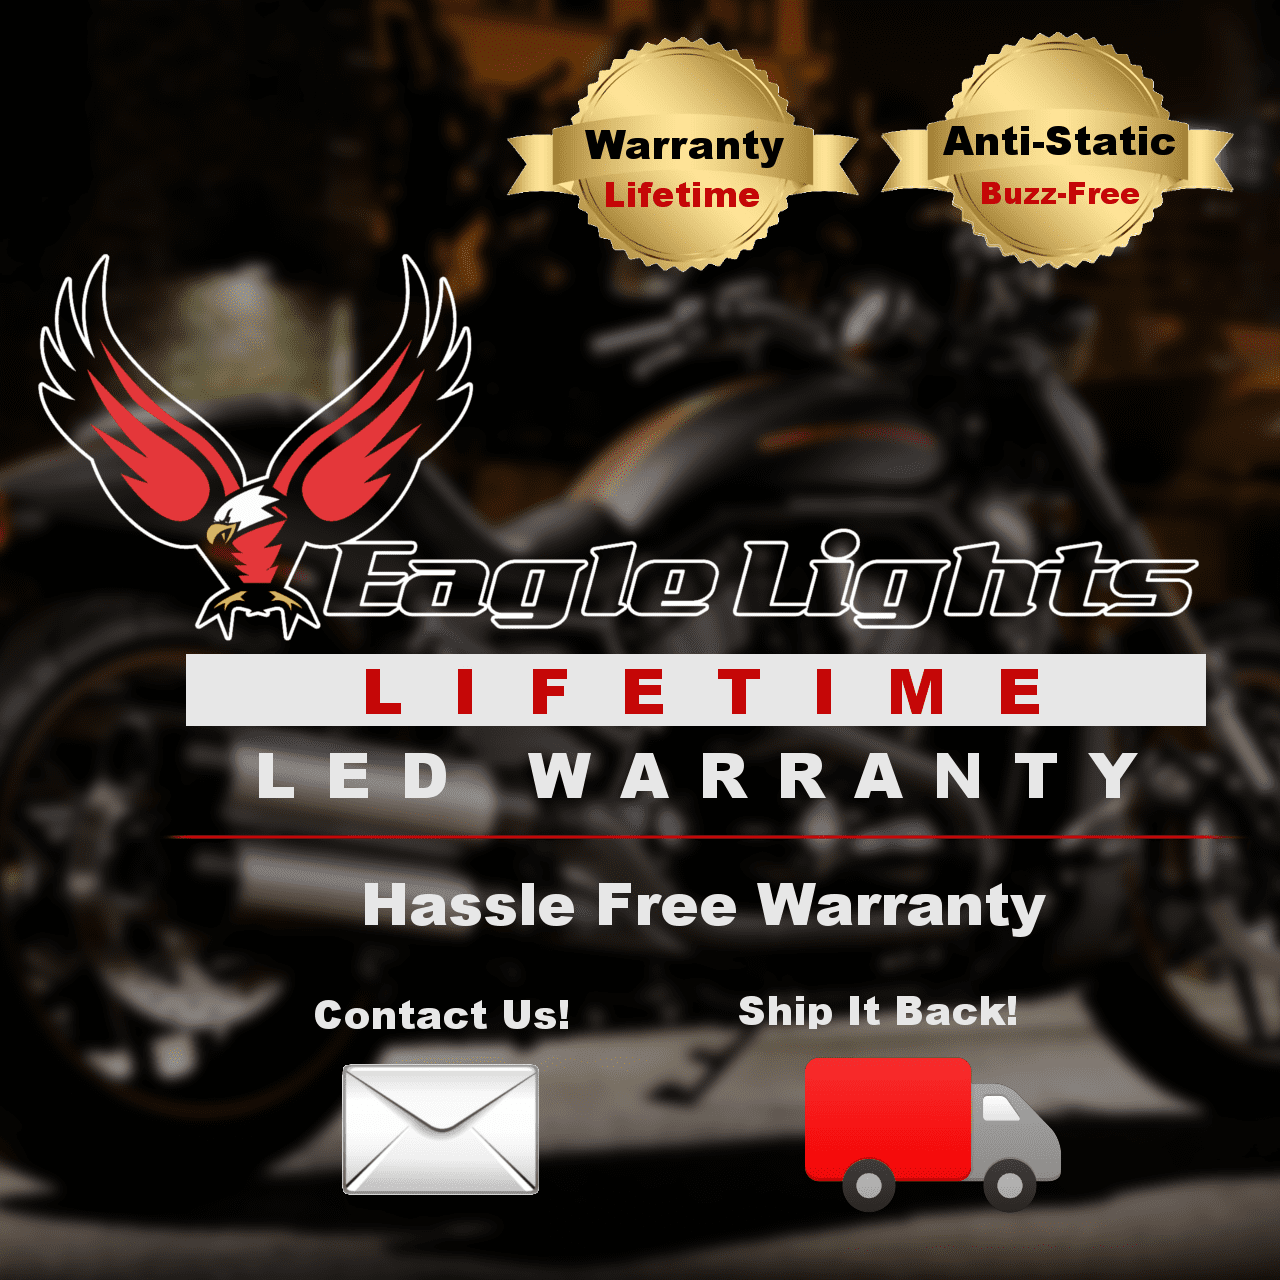 5 ¾” Halo & DRL LED Headlights - Eagle Lights 5 3/4" Round Projection LED Headlight With Full Halo Ring*